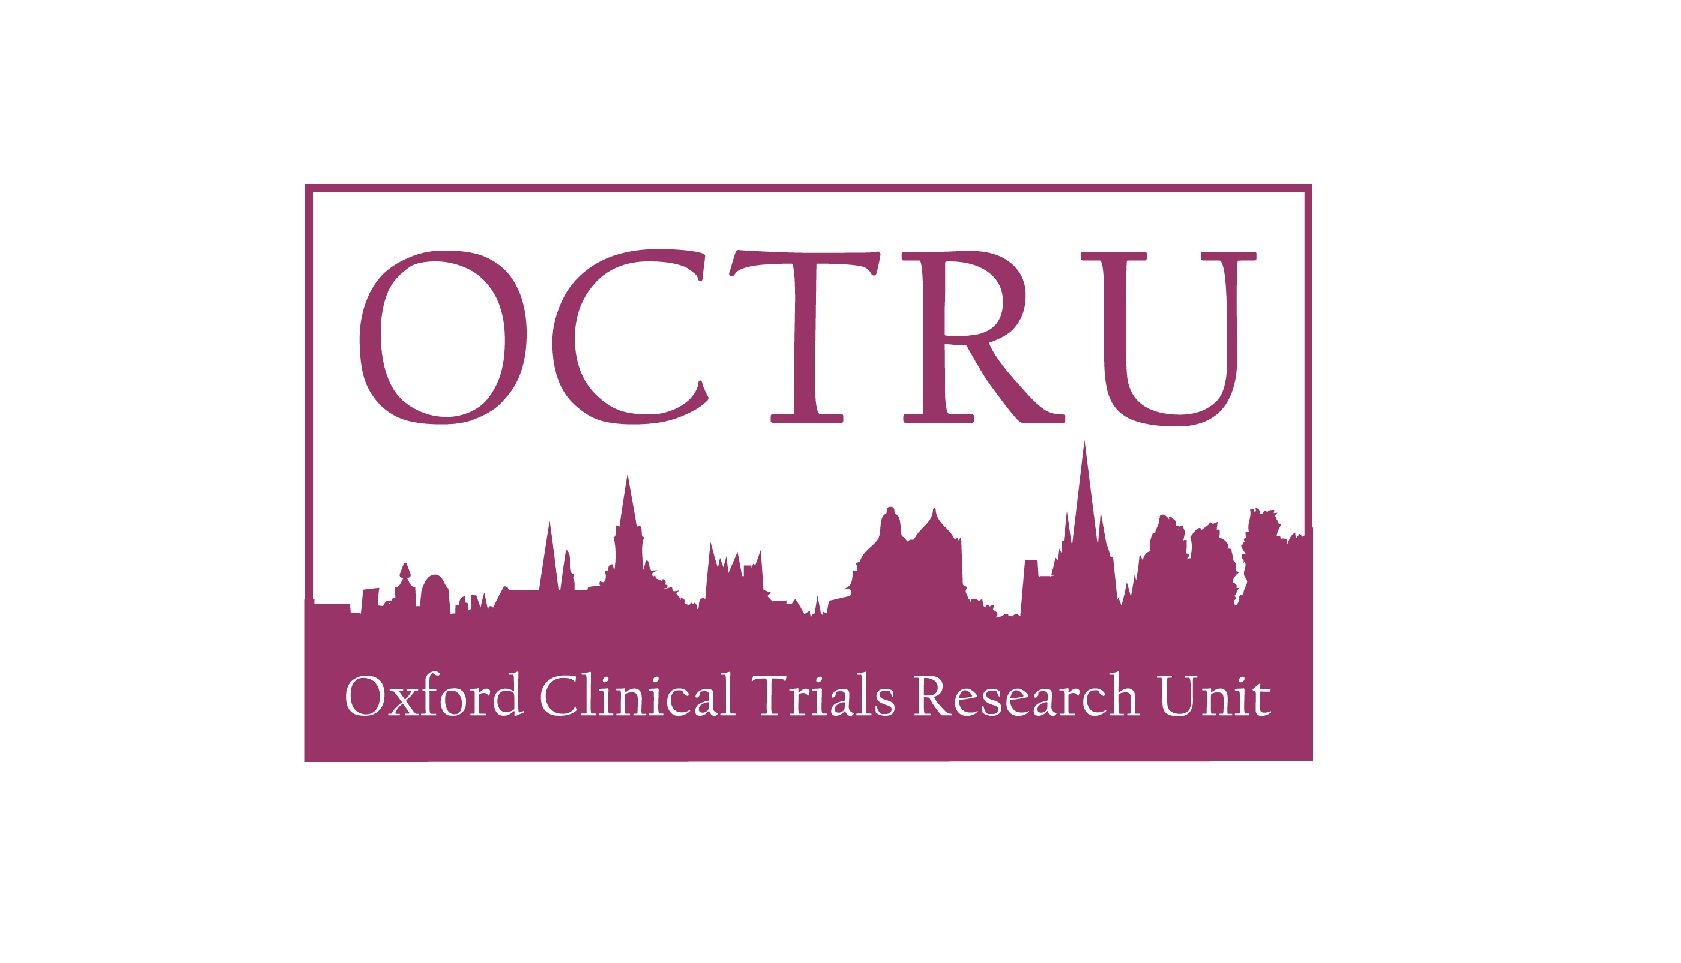 Oxford Clinical Trial Research unit logo